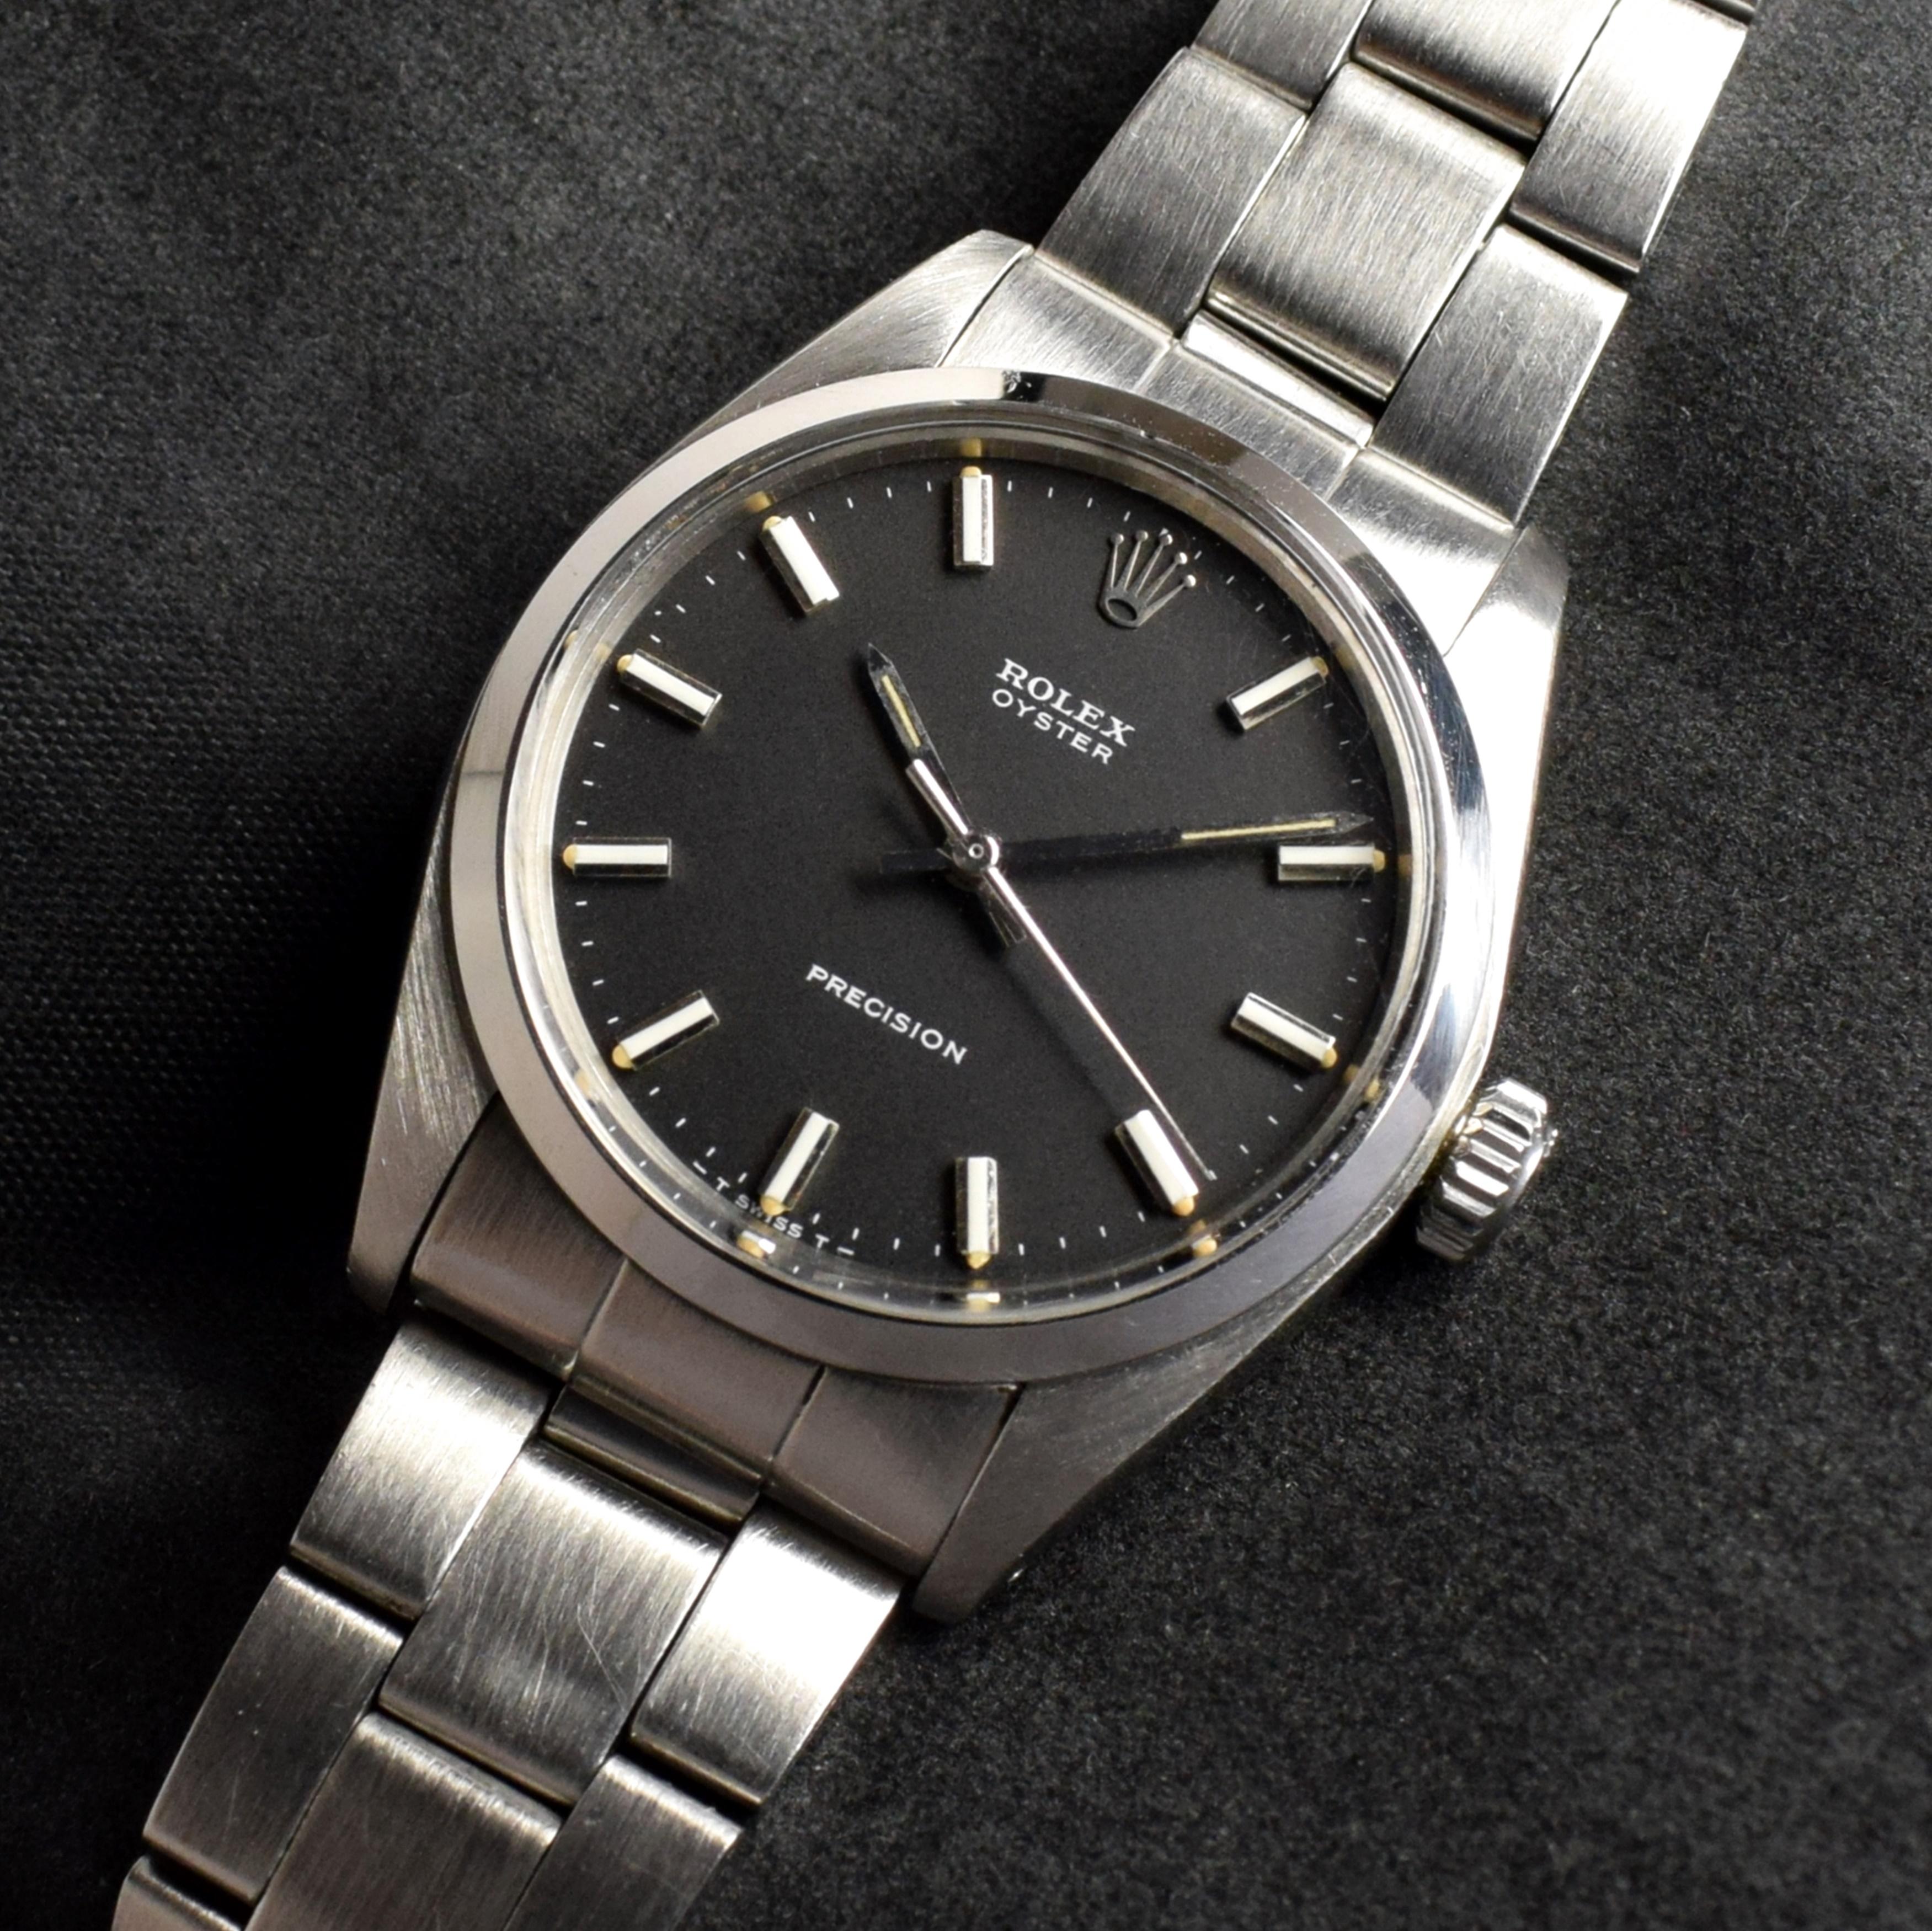 Brand: Vintage Rolex
Model: 6426
Year: 1972
Serial number: 30xxxxx
Reference: C03561
Case: 34mm without crown; Show sign of wear with slight polish from previous; inner case back stamped 6426
Dial: Excellent Clean Condition Matte Black Dial with